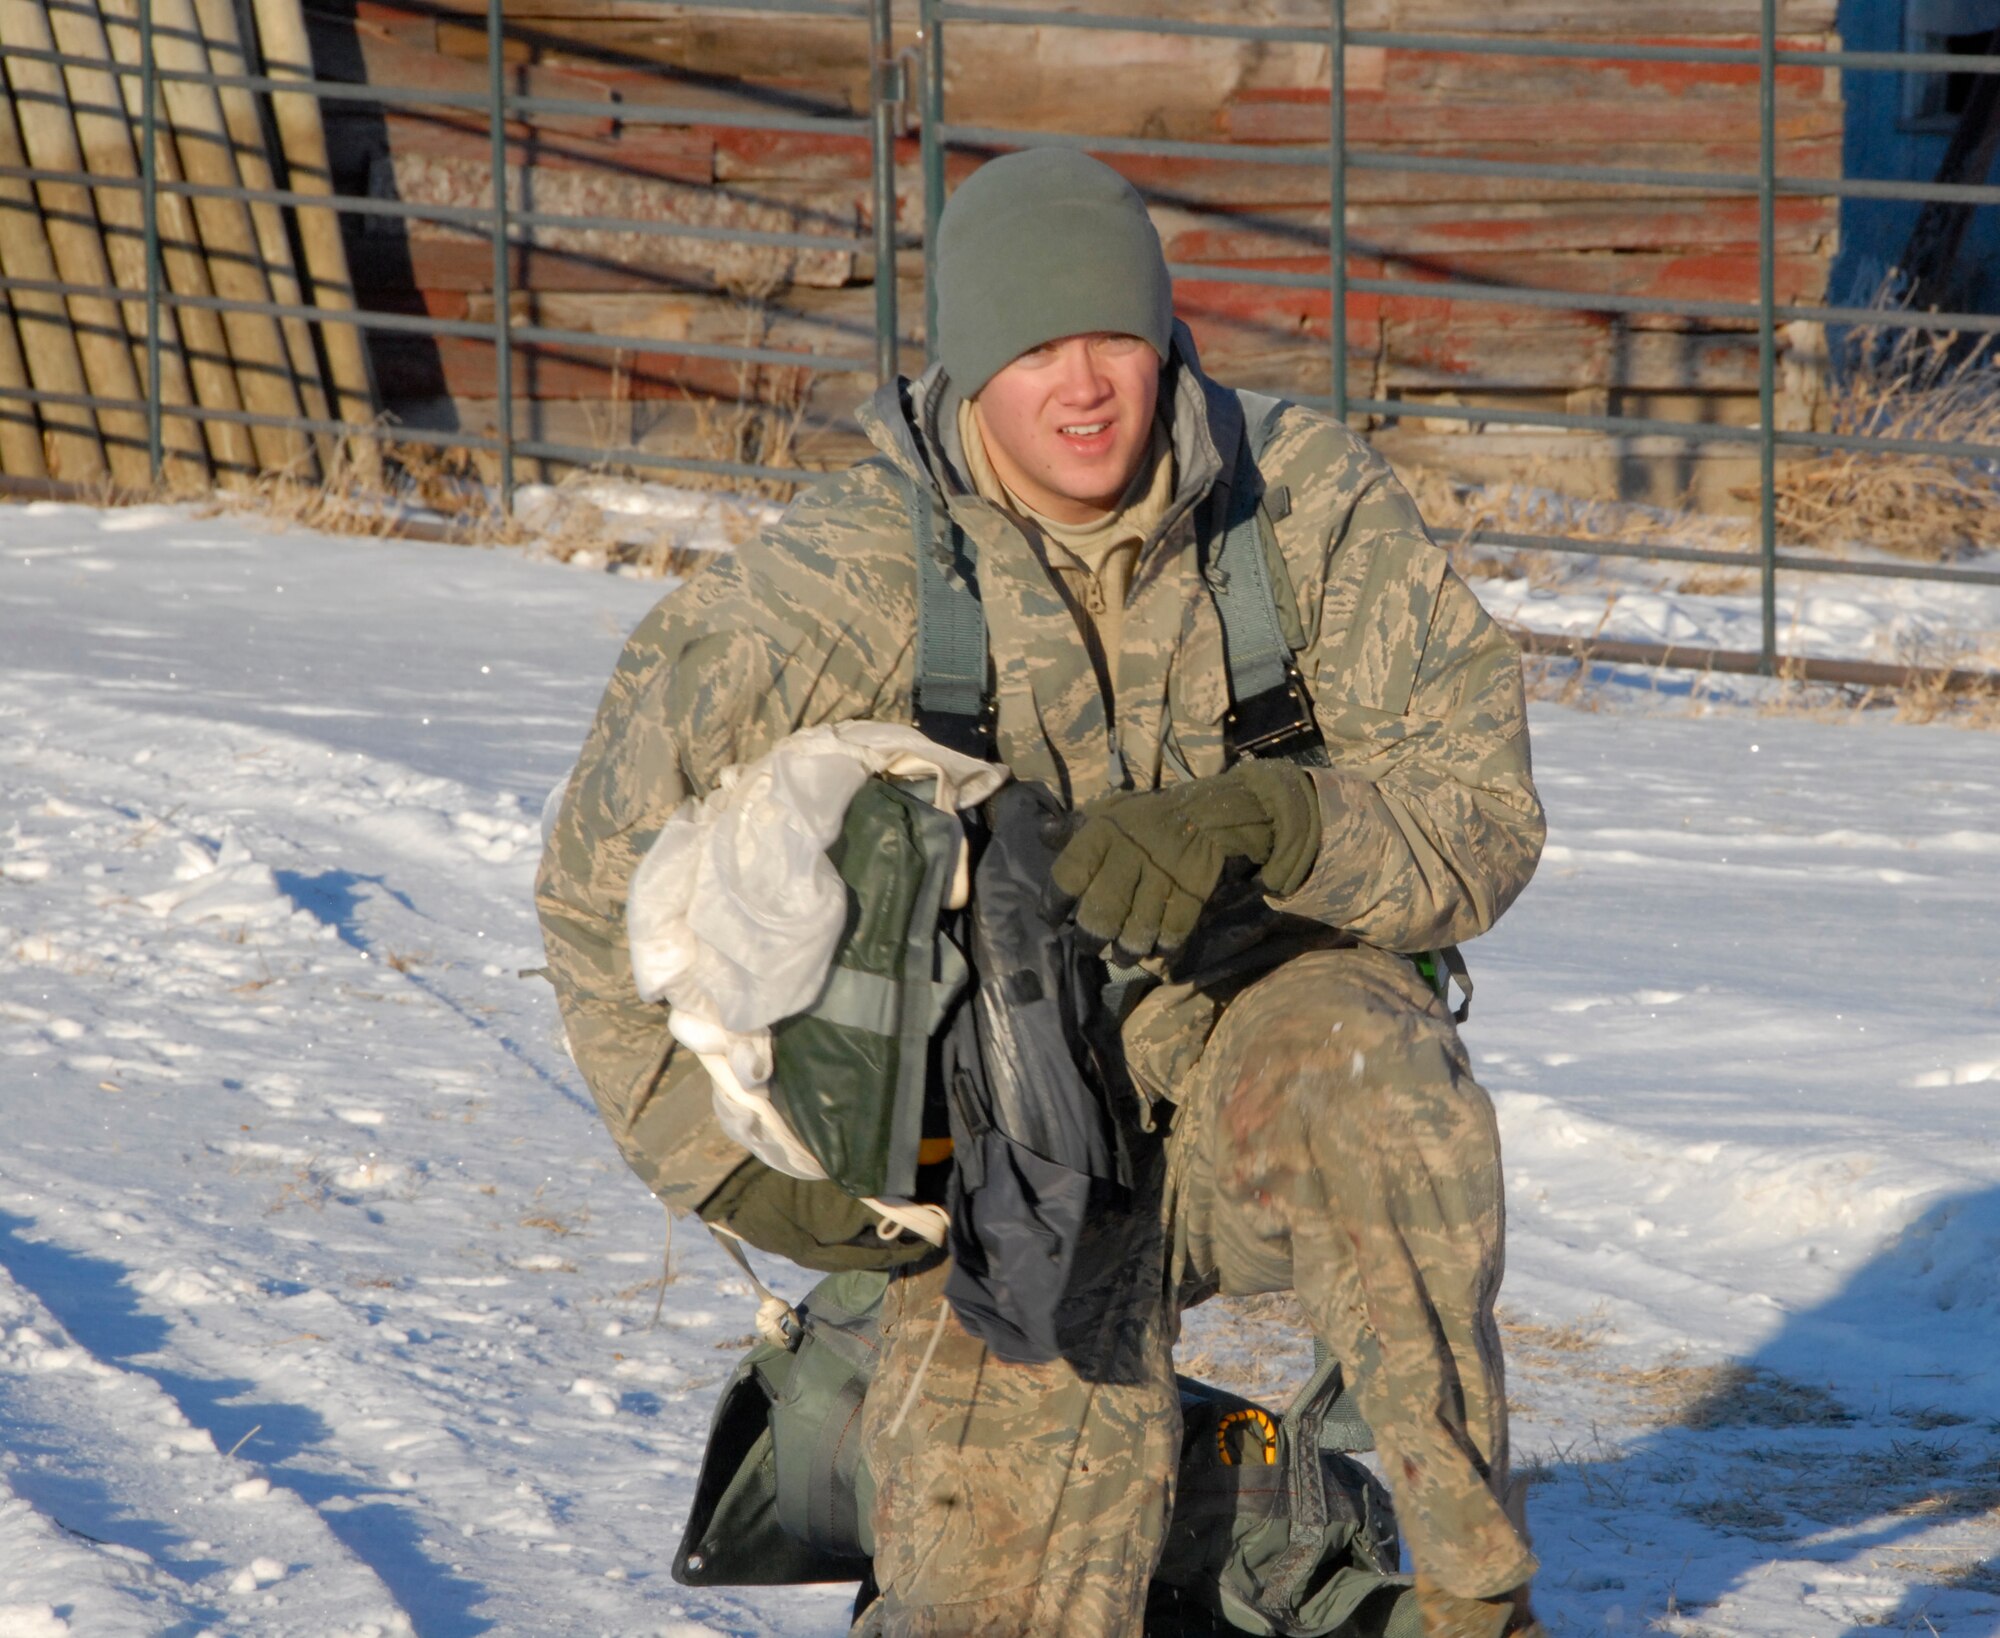 SIOUX FALLS, S.D.- Staff Sgt. Bo Martz, 175 Fighter Squadron Aircrew Flight Equipment technician, kneels in the snow with a paracute while instructing the Survival Evasion Resistance and Escape refresher training during combat survival training near Joe Foss Field, S.D. Jan. 6.  (National Guard photo by Senior Airman Amanda Bradshaw)(Released)